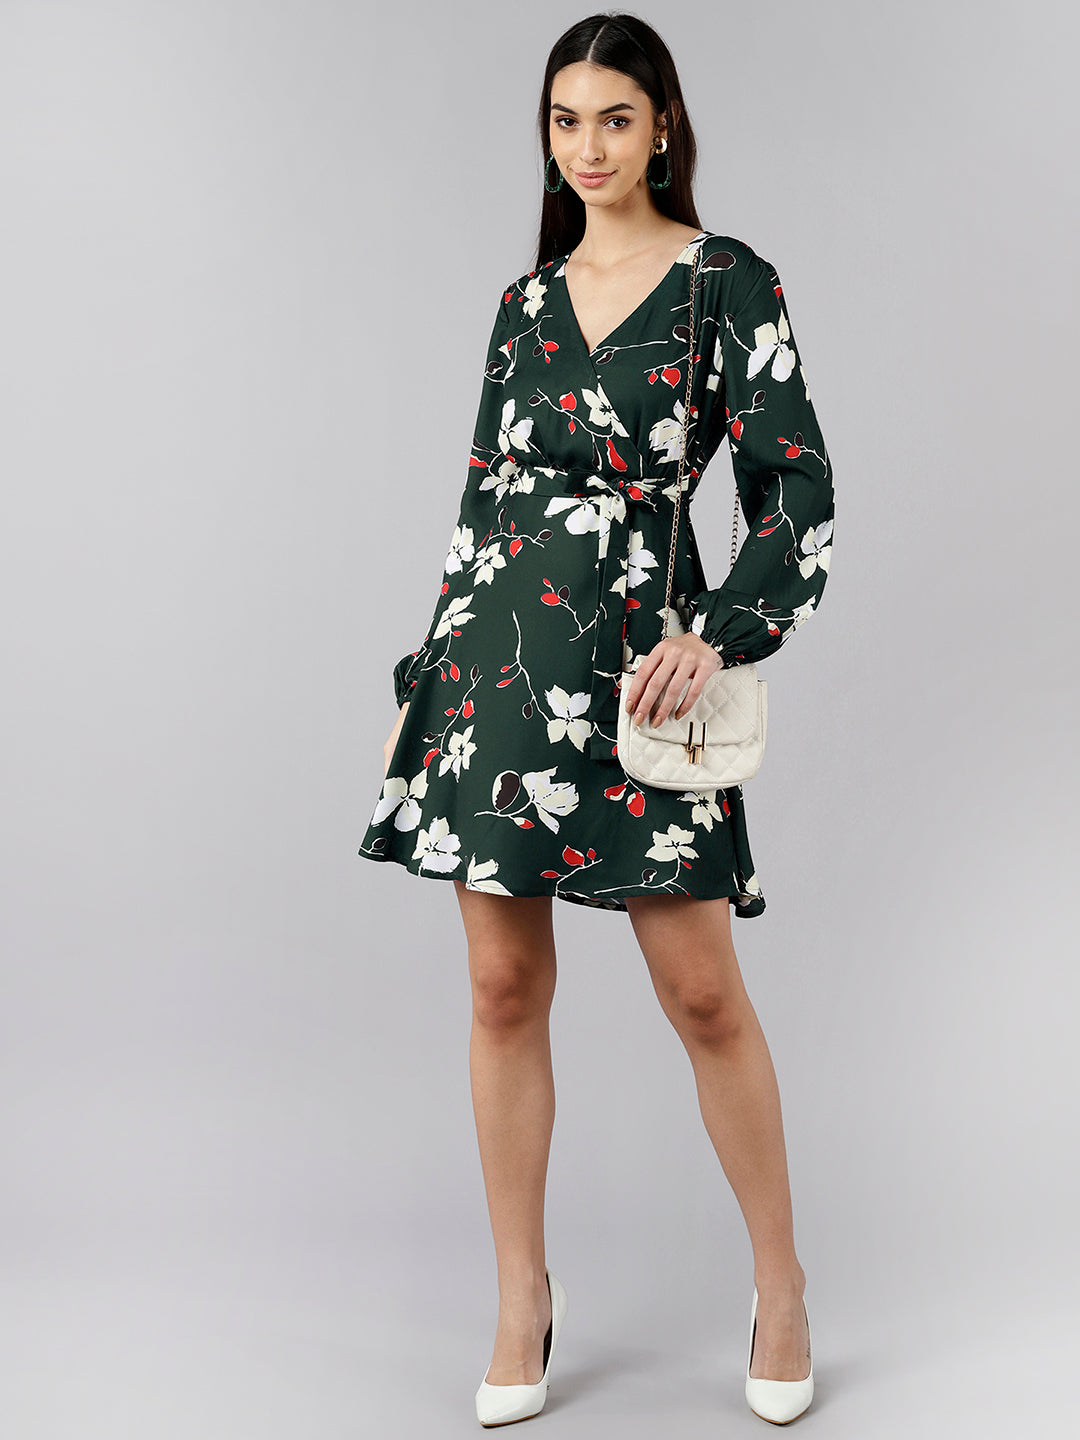 Women's Green Polyester Floral Printed Dress  - Ahika